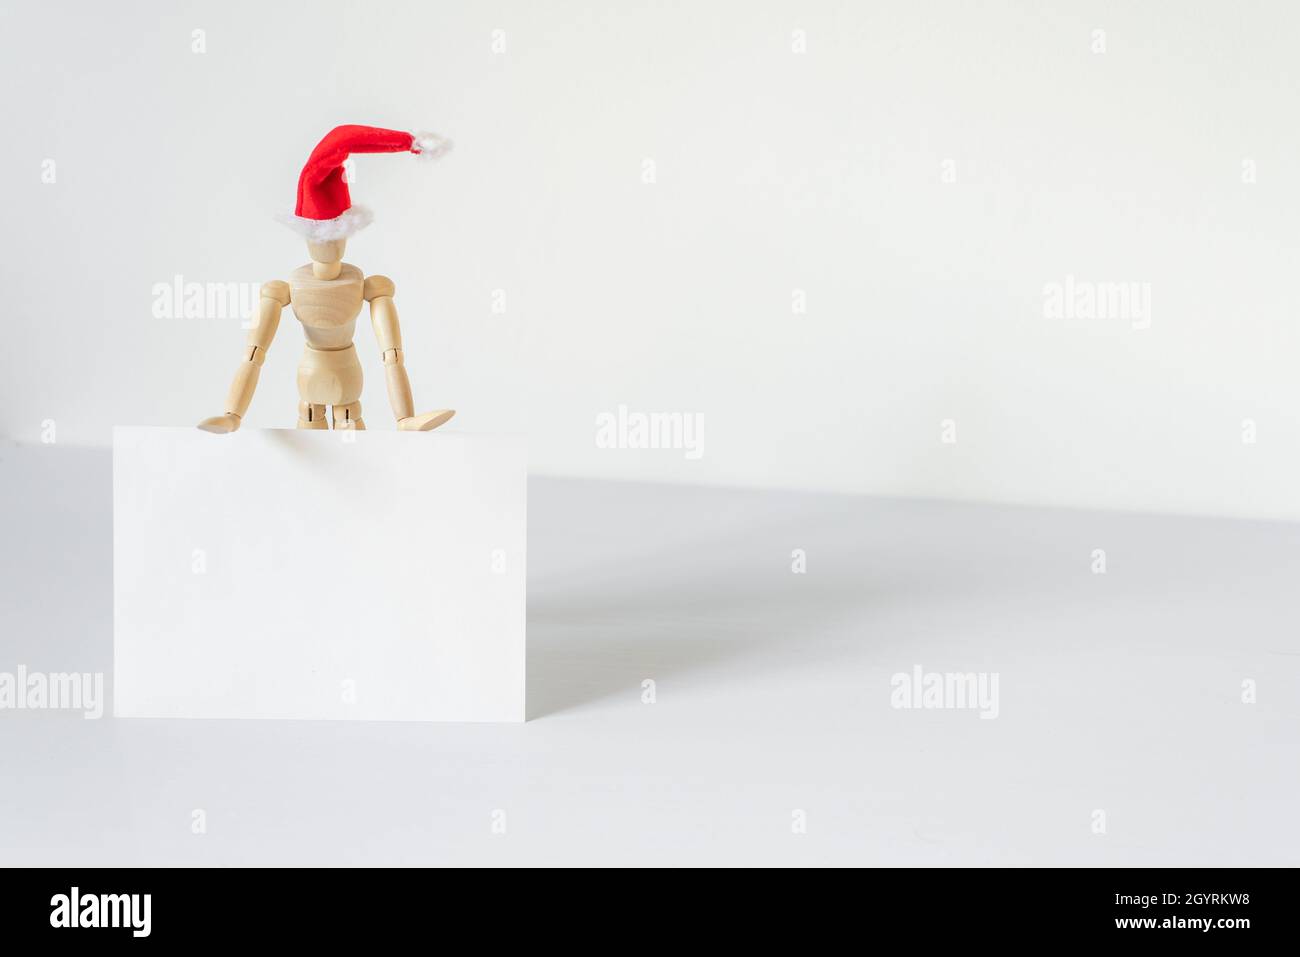 Christmas blank greeting card mock-up scene. Wooden mannequin posing on greeting card or gift list with red Santa Claus hat.Modern and minimal Santa C Stock Photo